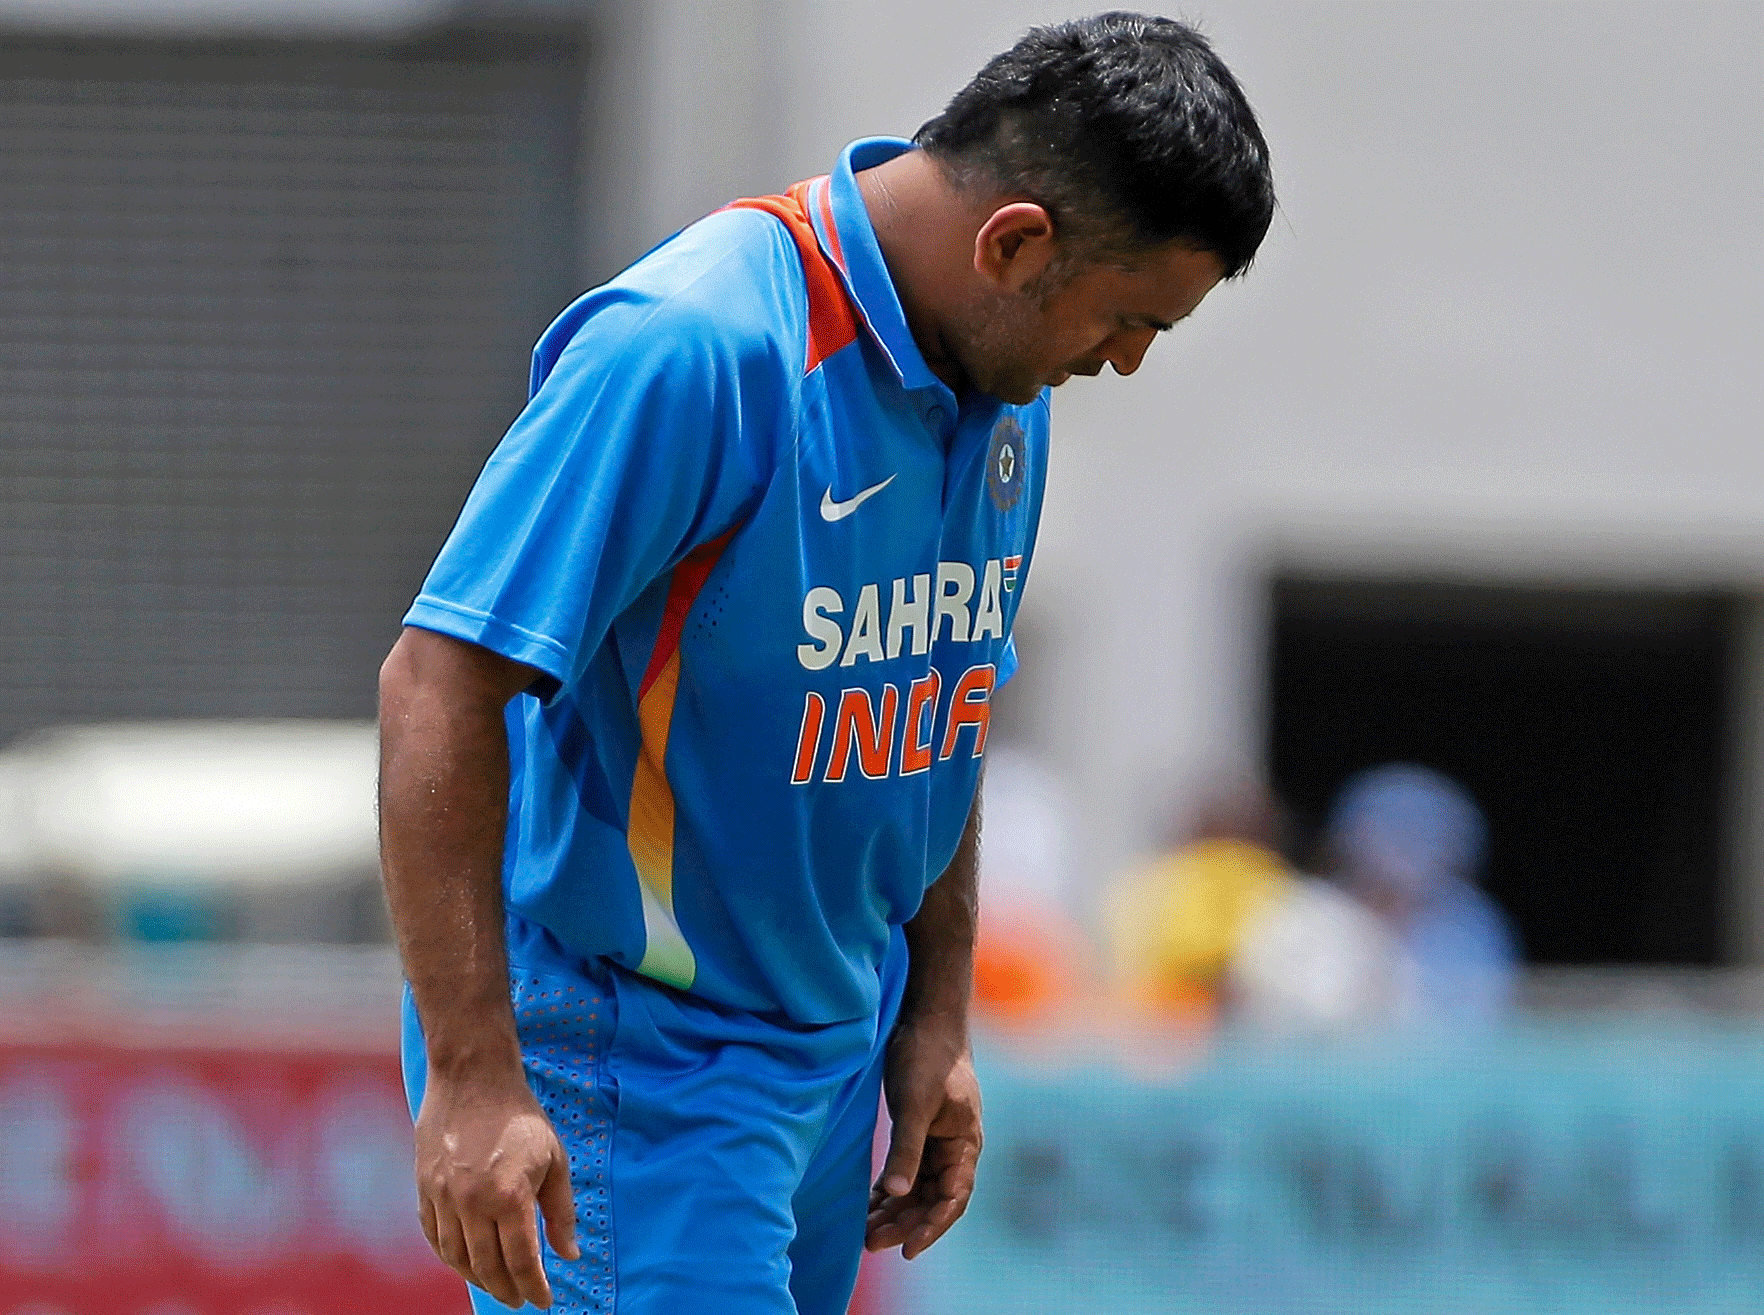 Mahendra Singh Dhoni removes the pad from his right leg after a light injury during the Tri-Nation Series cricket match against the West Indies in Kingston, Jamaica, Sunday, June 30, 2013. The Board of Control for Cricket in India (BCCI) announced on Monday that Dhoni has been ruled out of the ongoing Tri-Nation Series due to a hamstring injury and he will be replaced by Ambati Rayudu. (AP Photo)